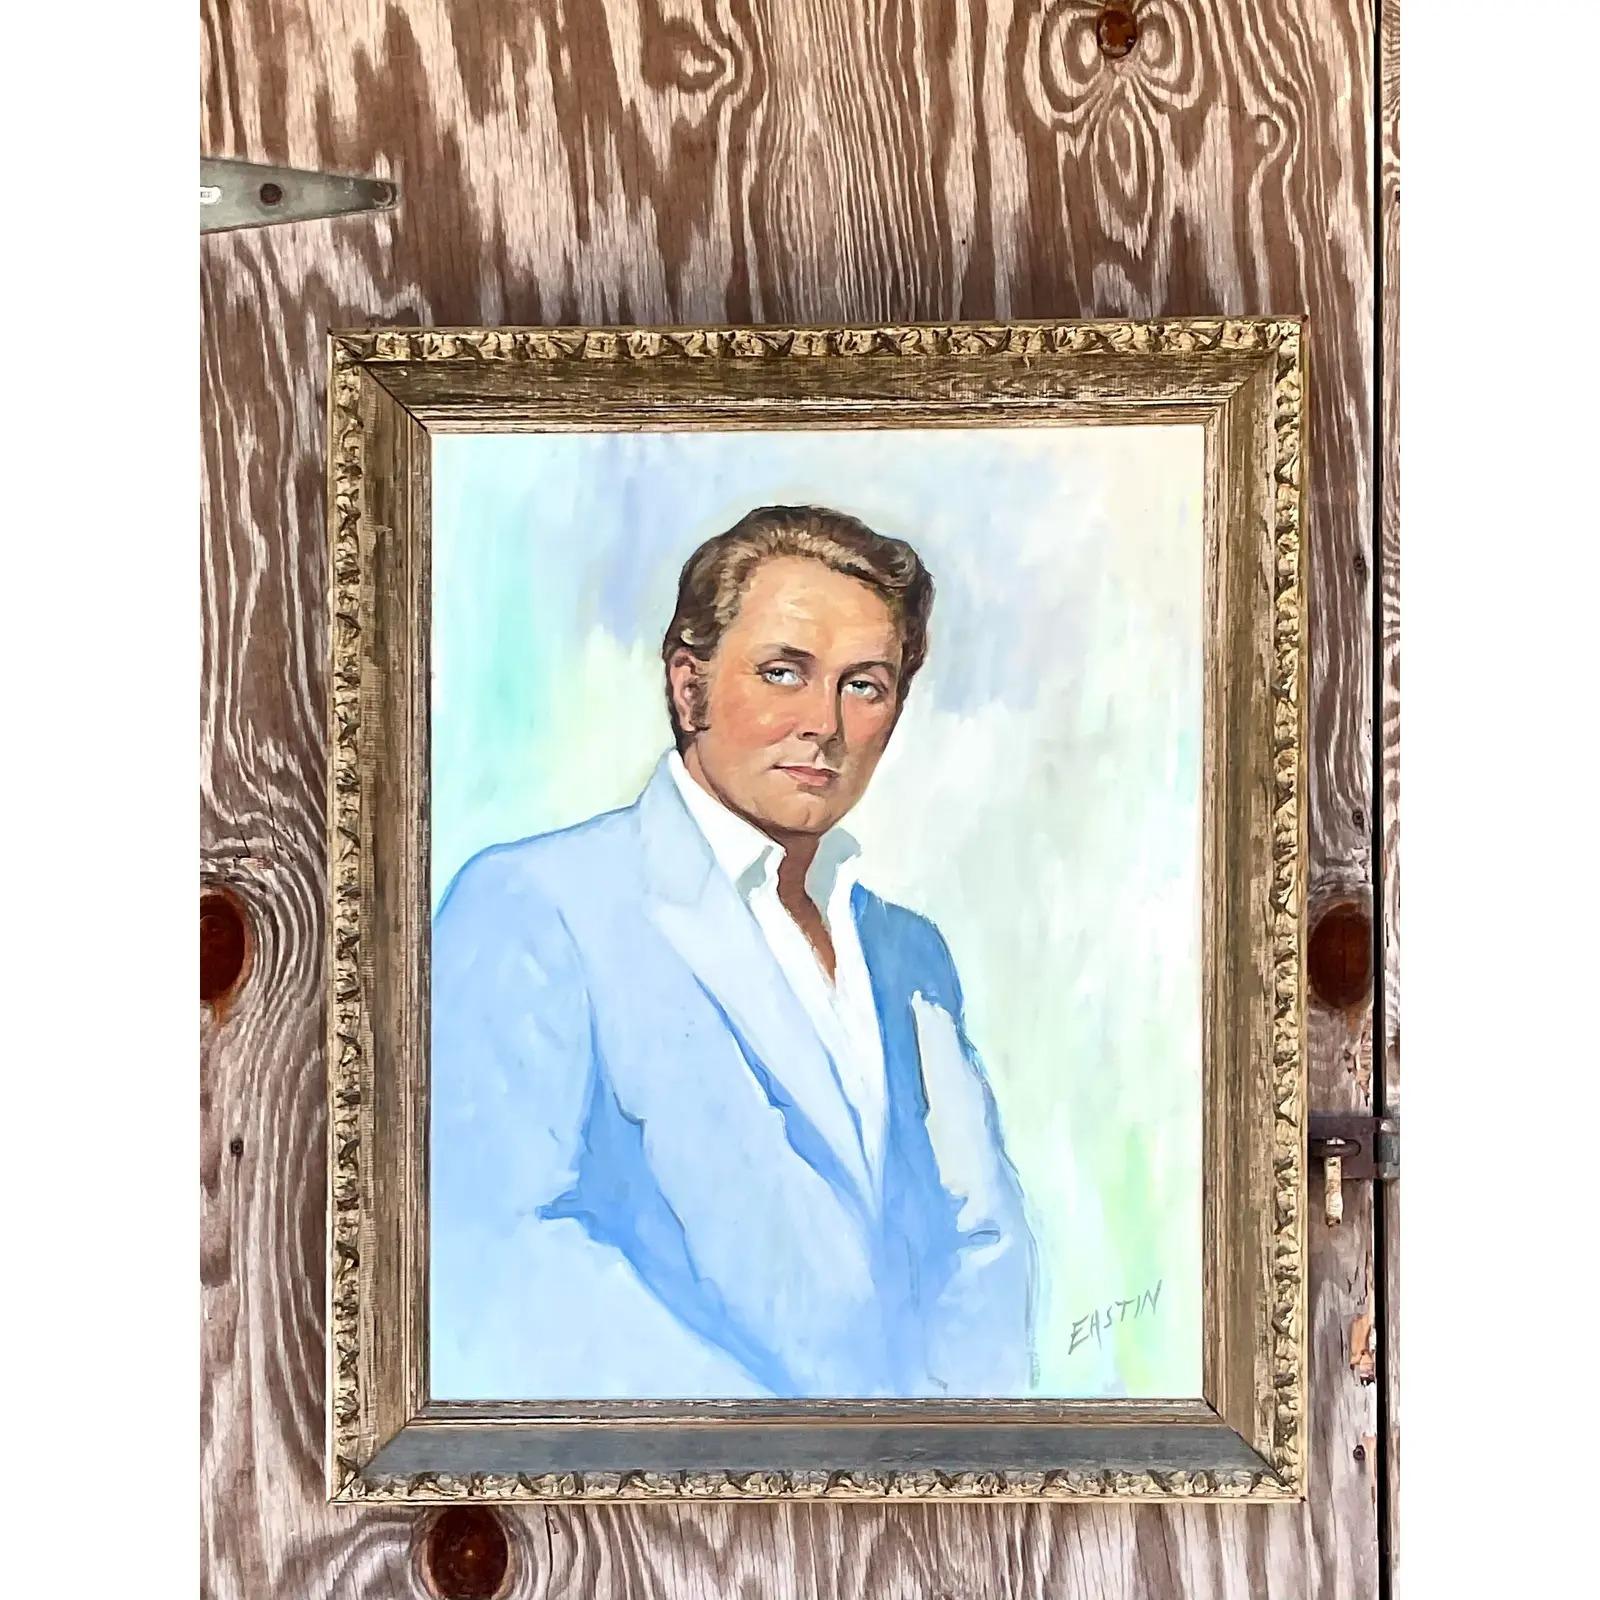 A fabulous vintage original oil portrait. A beautifully colored composition of a dashing gentleman. Signed by the artist. Acquired from a Palm Beach estate.